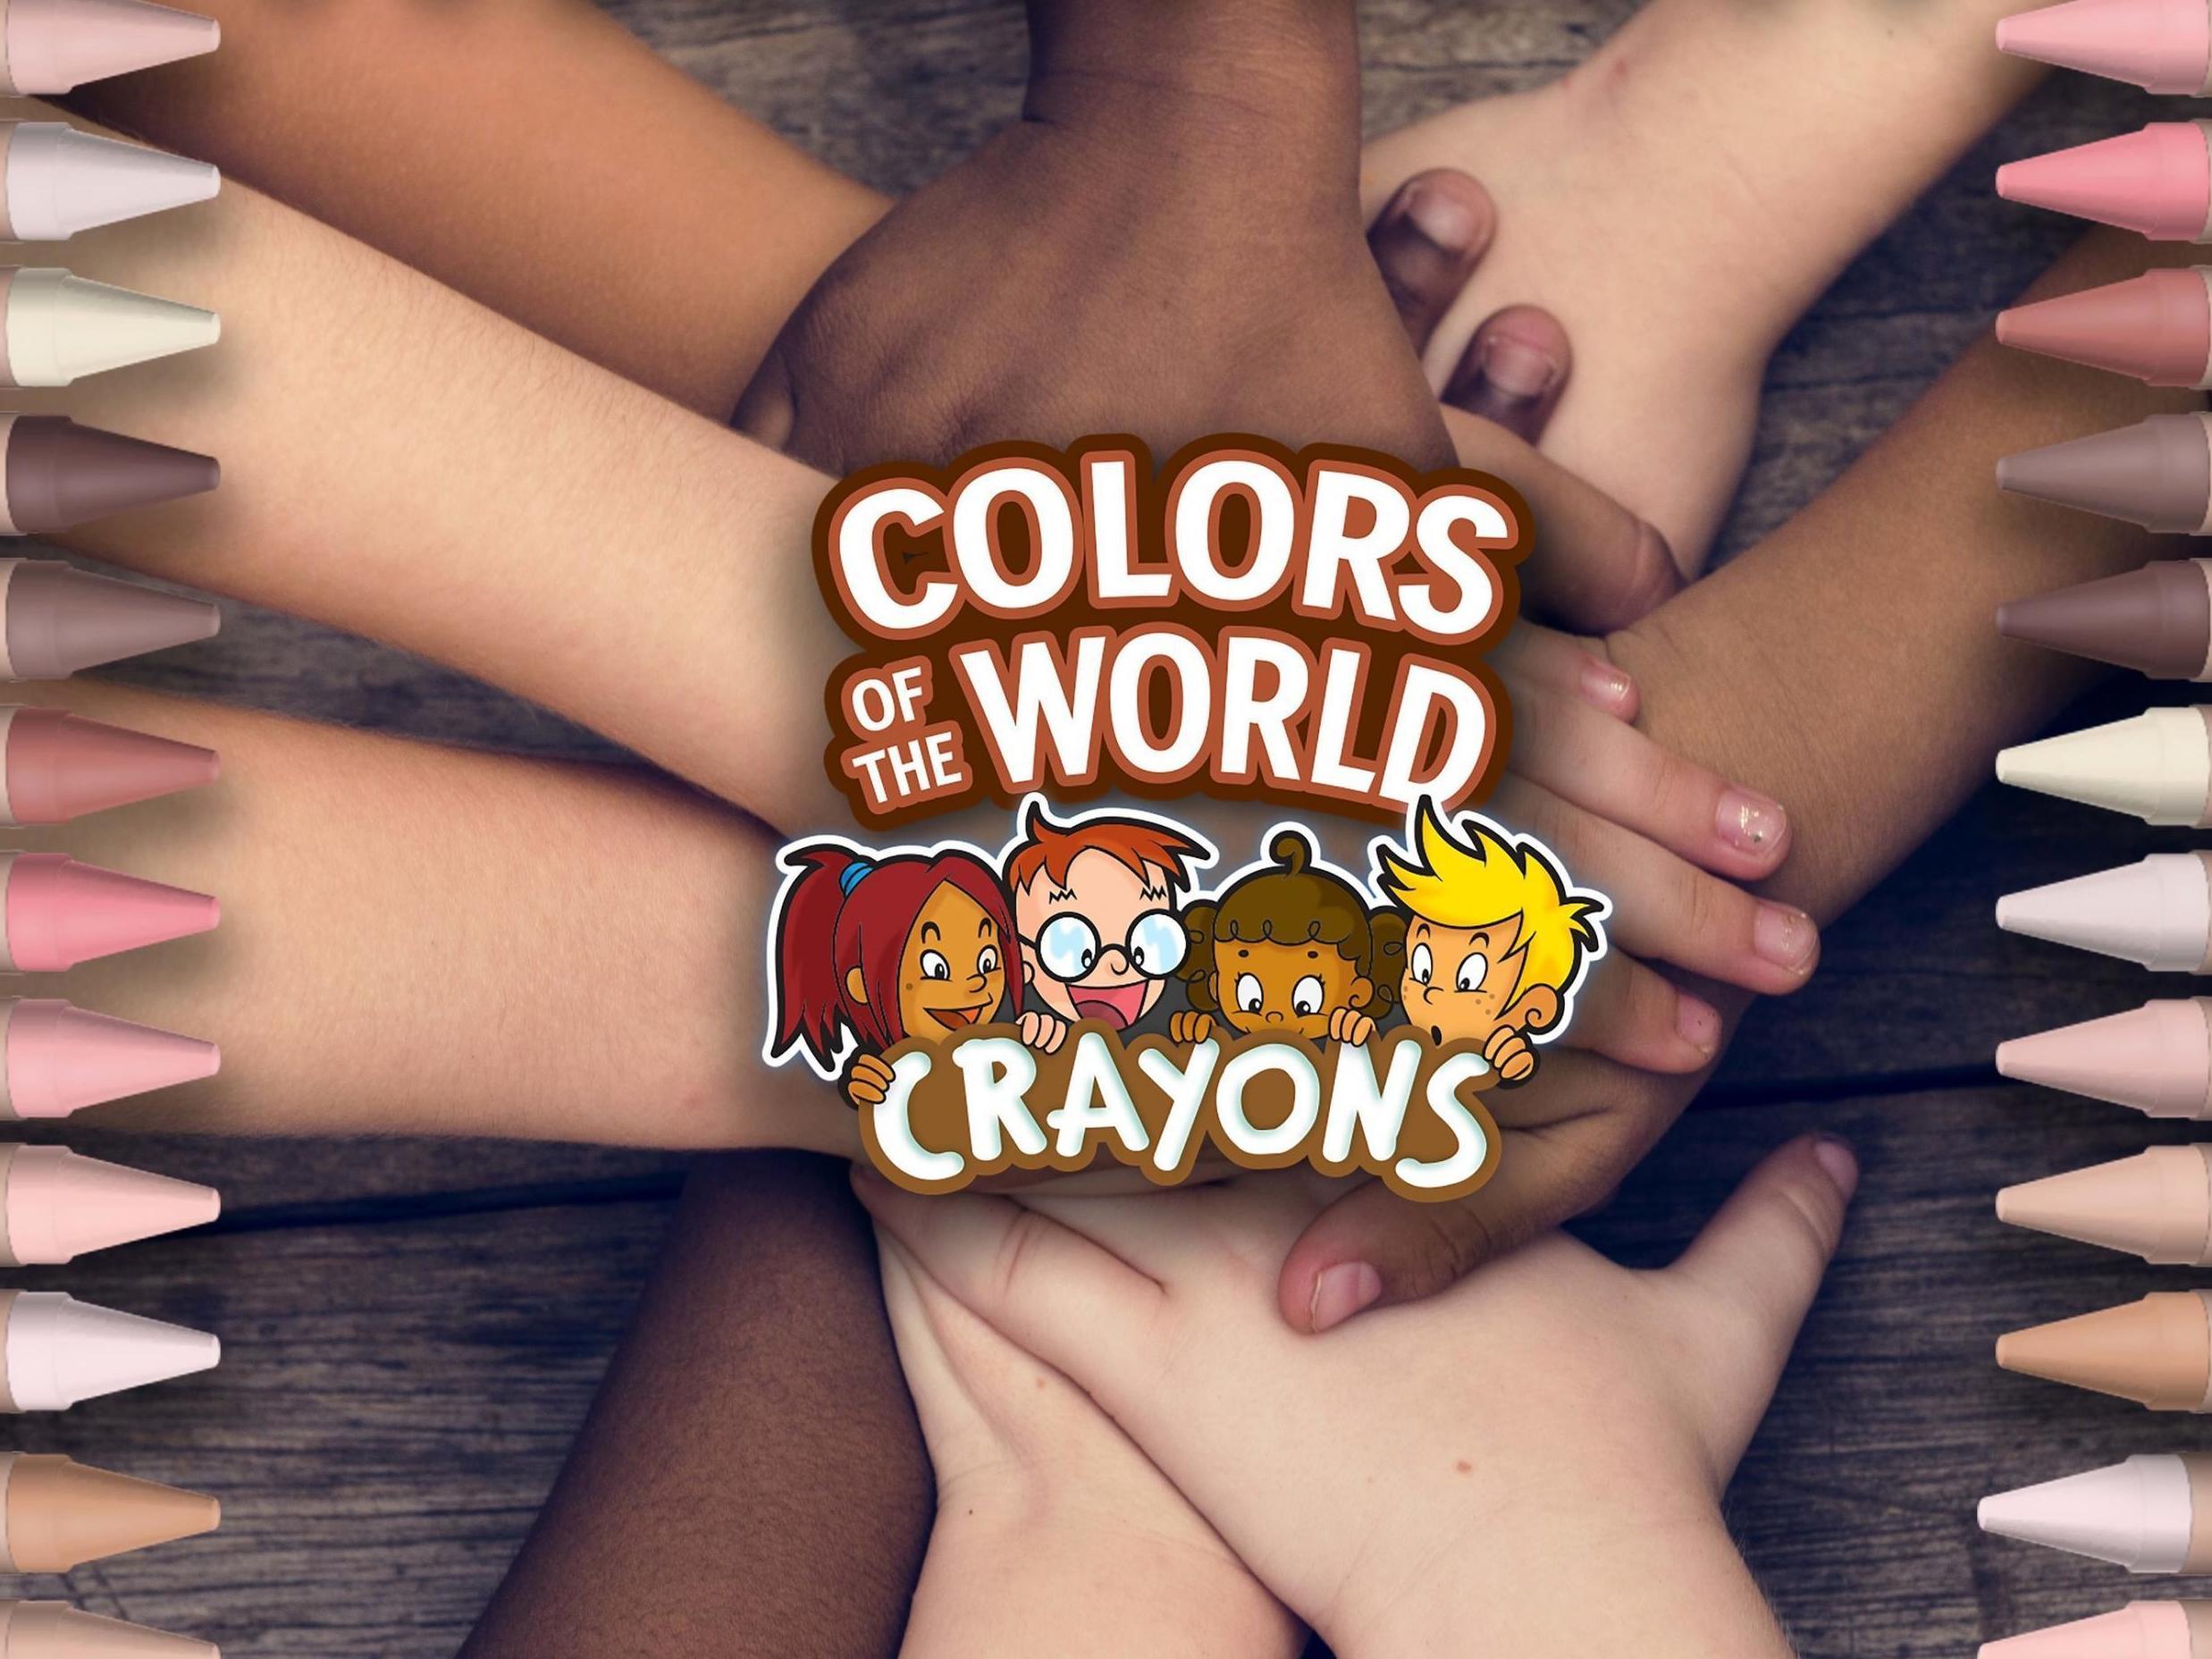 New Crayola color up for vote